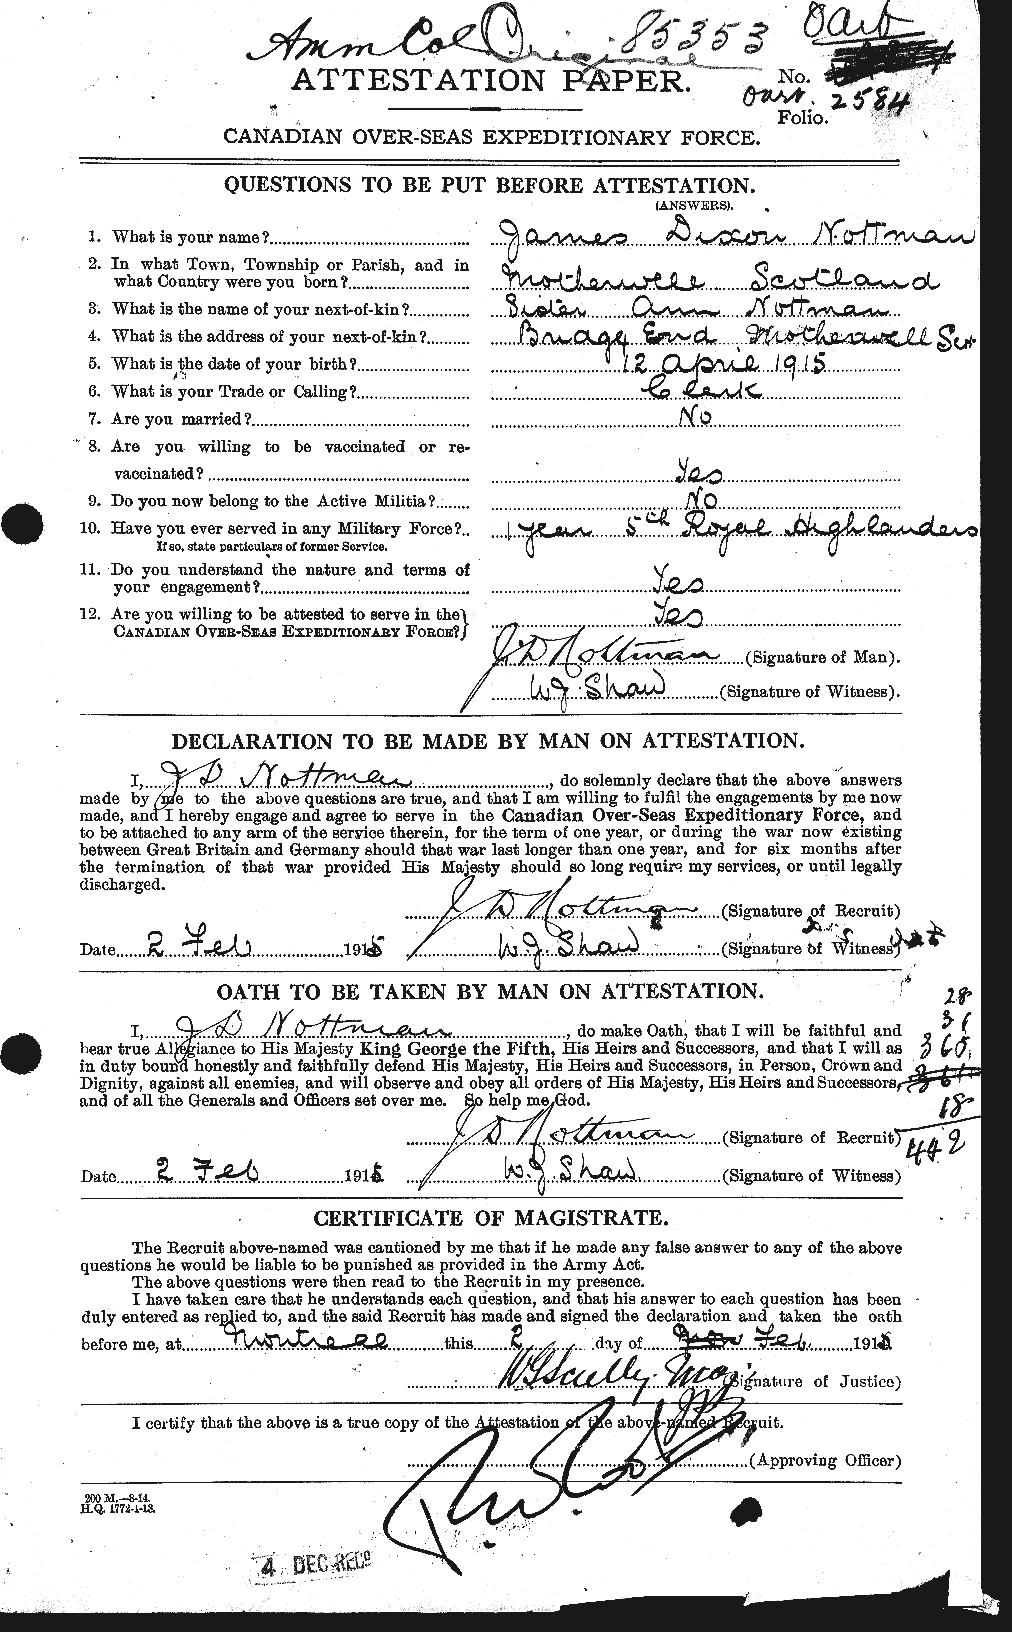 Personnel Records of the First World War - CEF 552028a